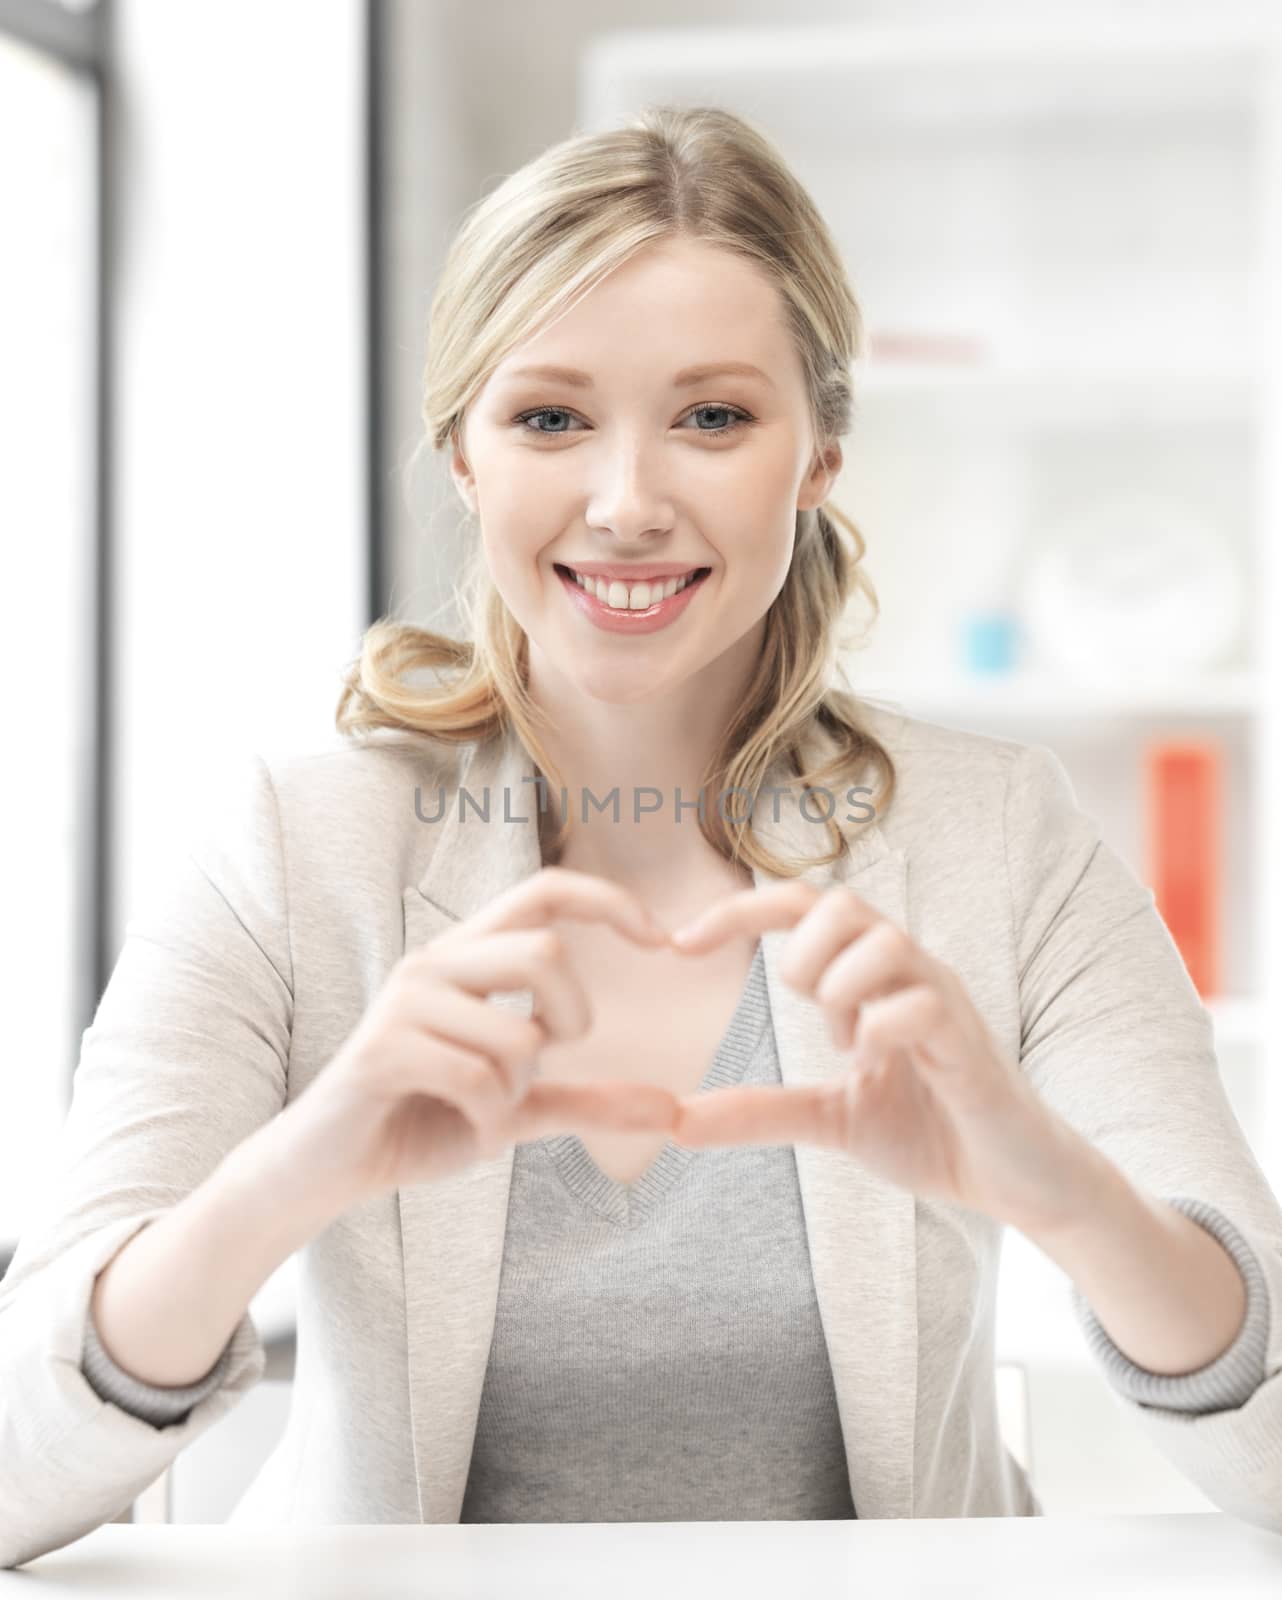 young woman showing heart sign by dolgachov